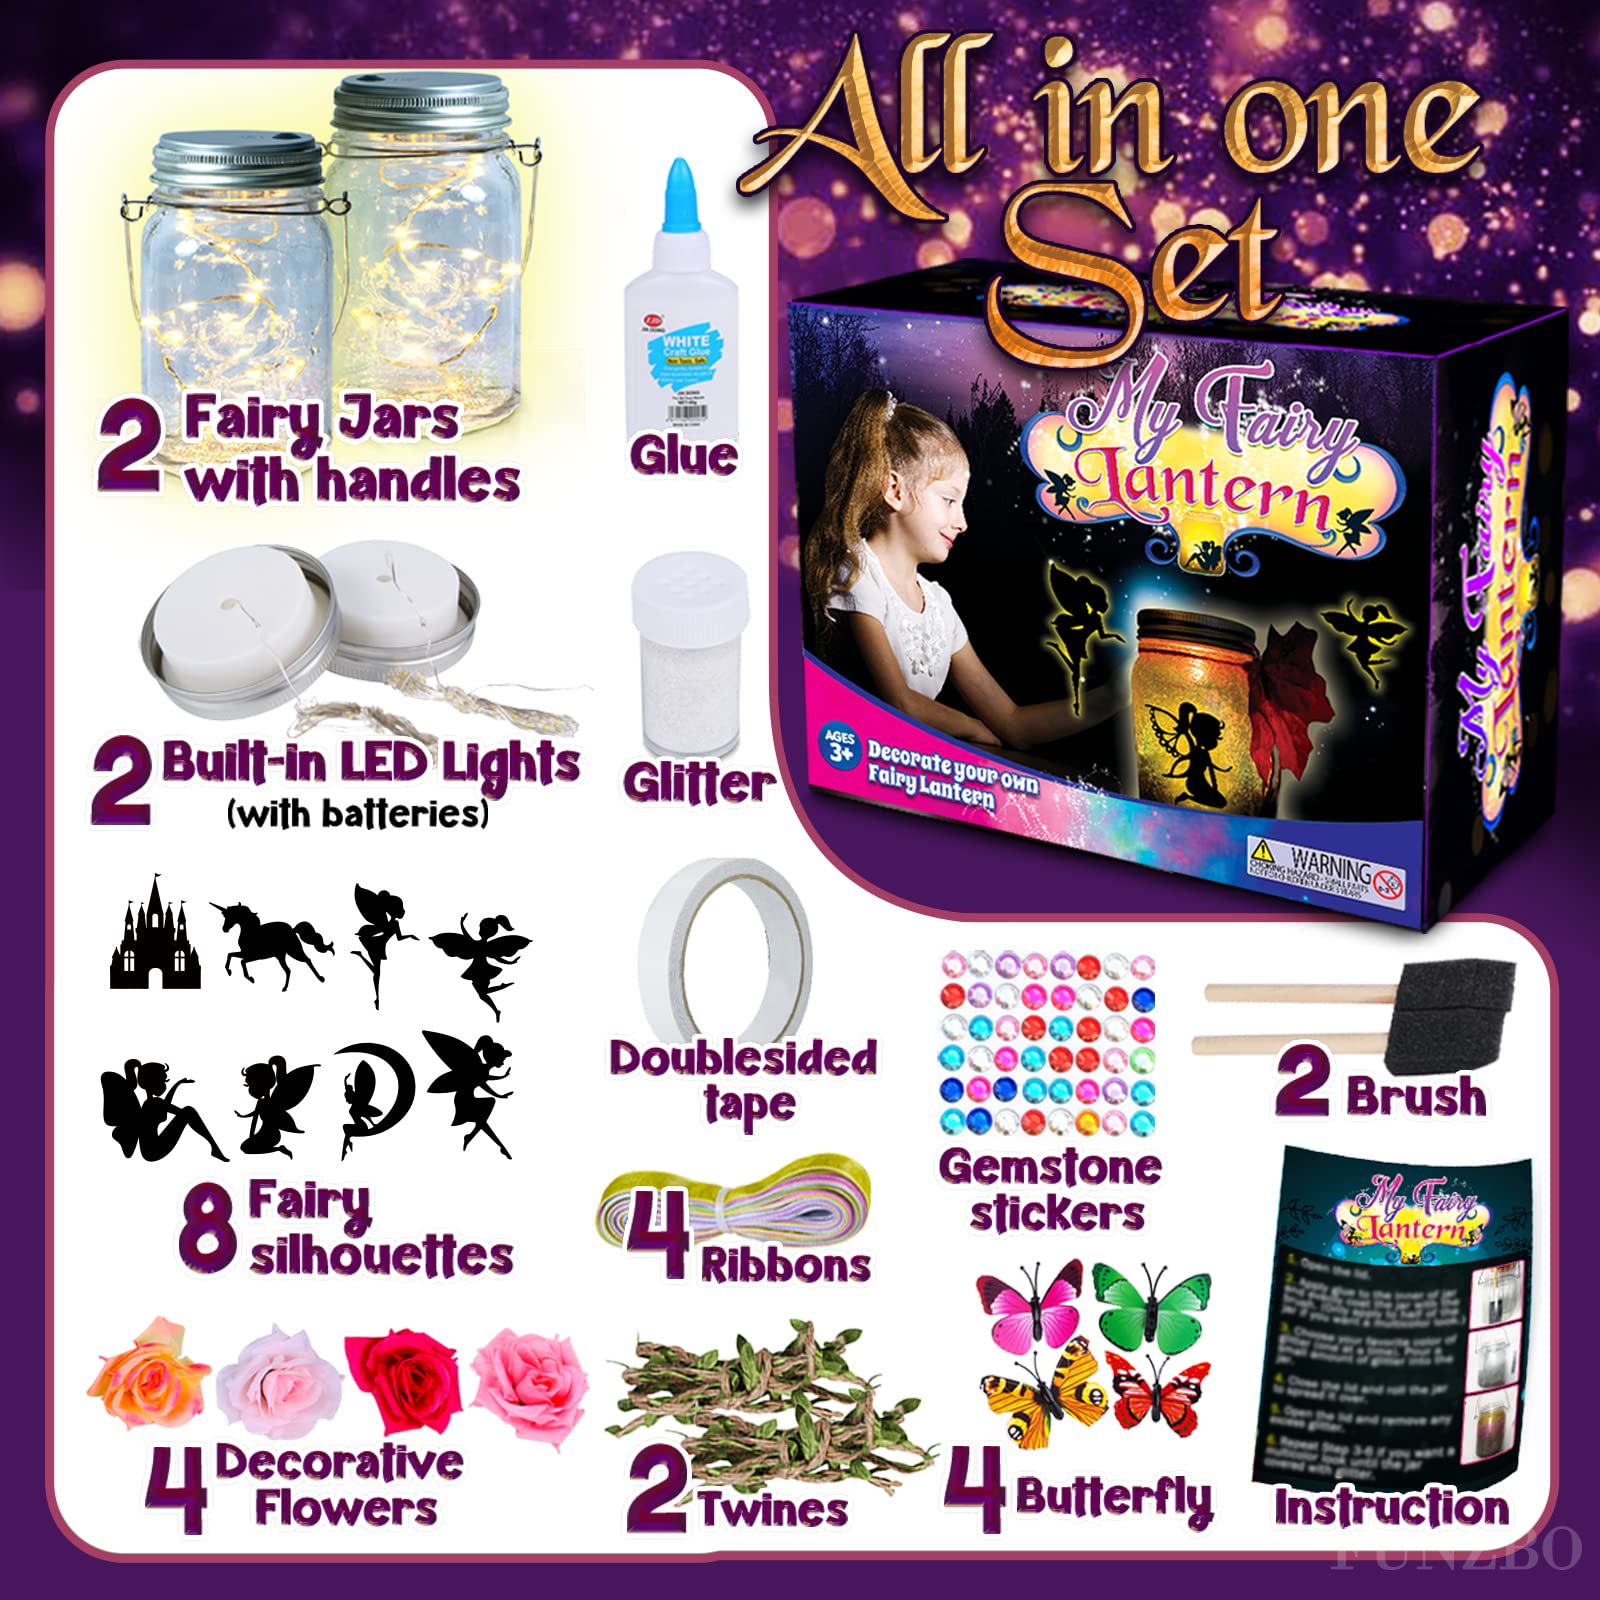 FUNZBO Fairy Lantern Craft Kits - Fairy Lights Battery Operated Crafts for Kids Ages 4-8, Arts and Crafts Supplies, Fairy Toys with 2 Fairy Light Jar, 3, 4, 5, 6, 7, 8, 9 Year Old Girl Birthday Gifts